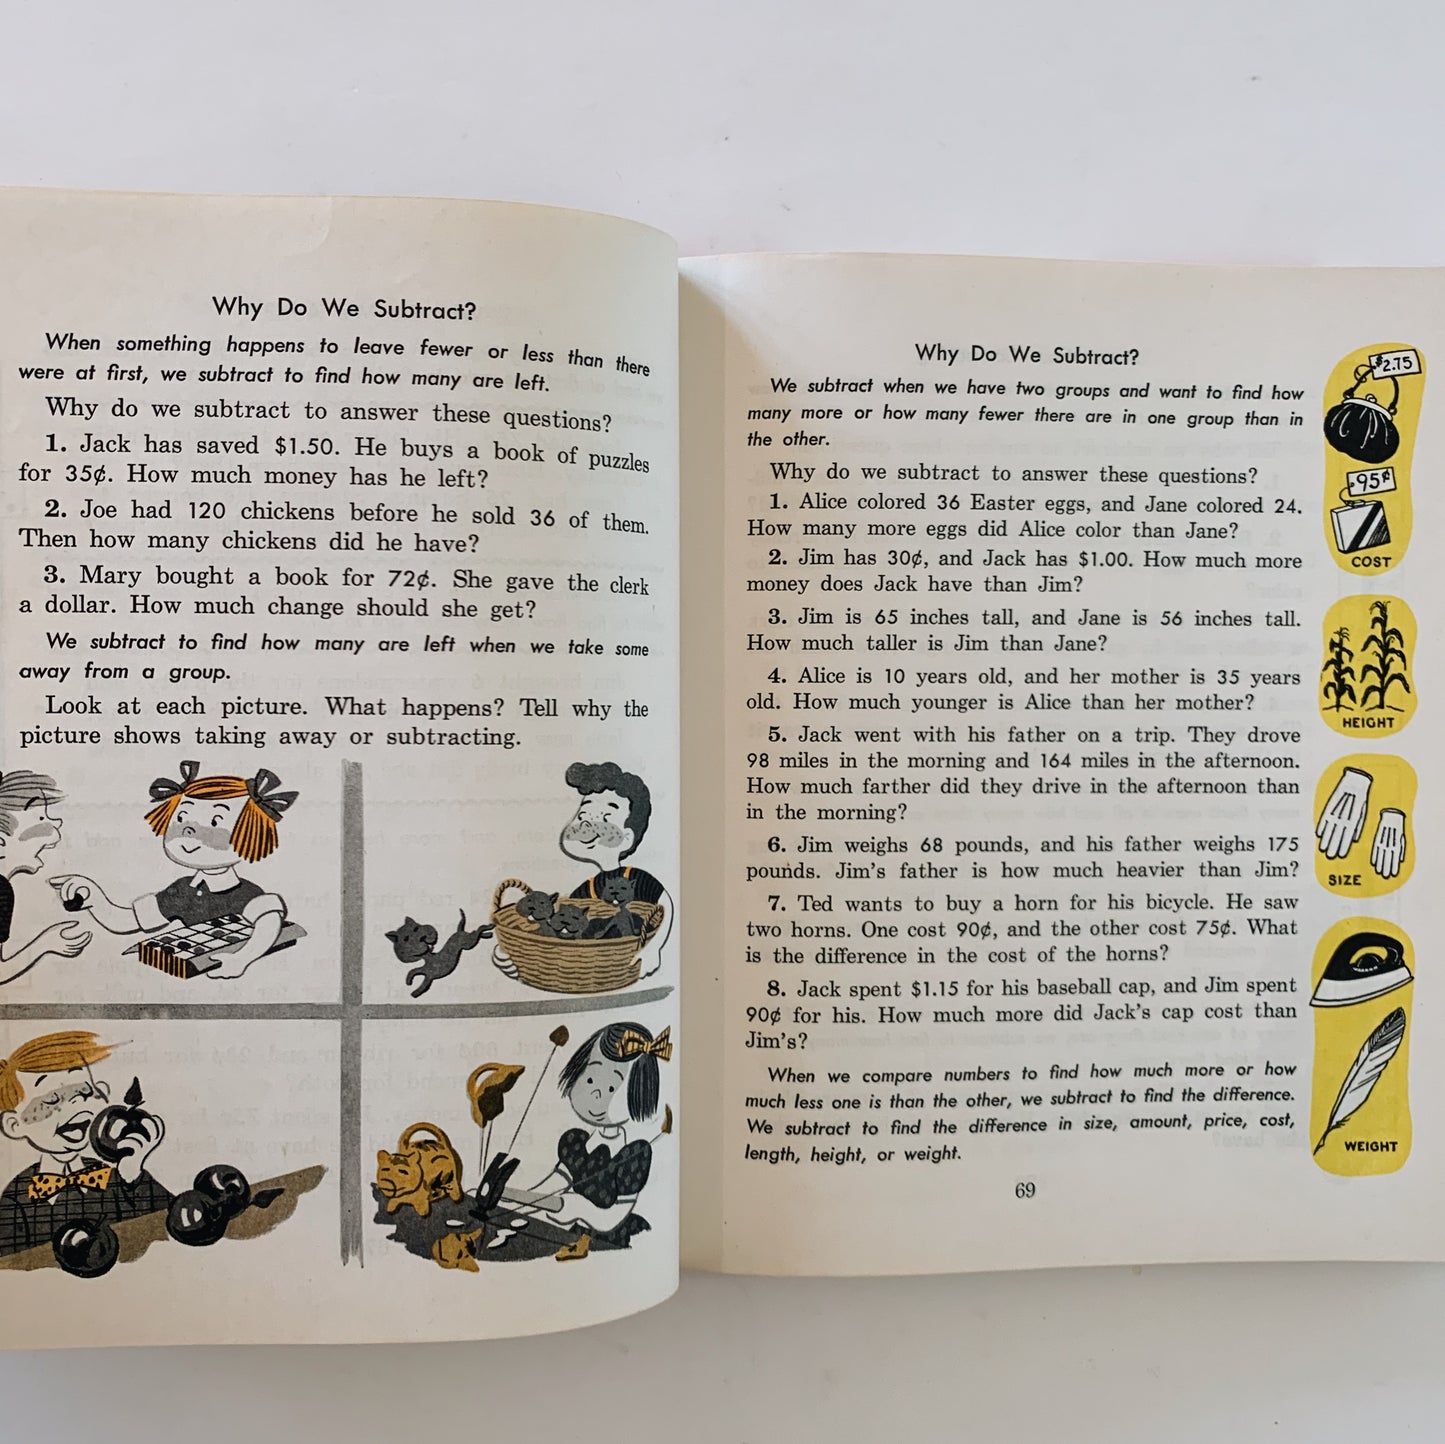 Row-Peterson Arithmetic, Book Five, 1961, Mid-Century Math Textbook, Color Illustrations